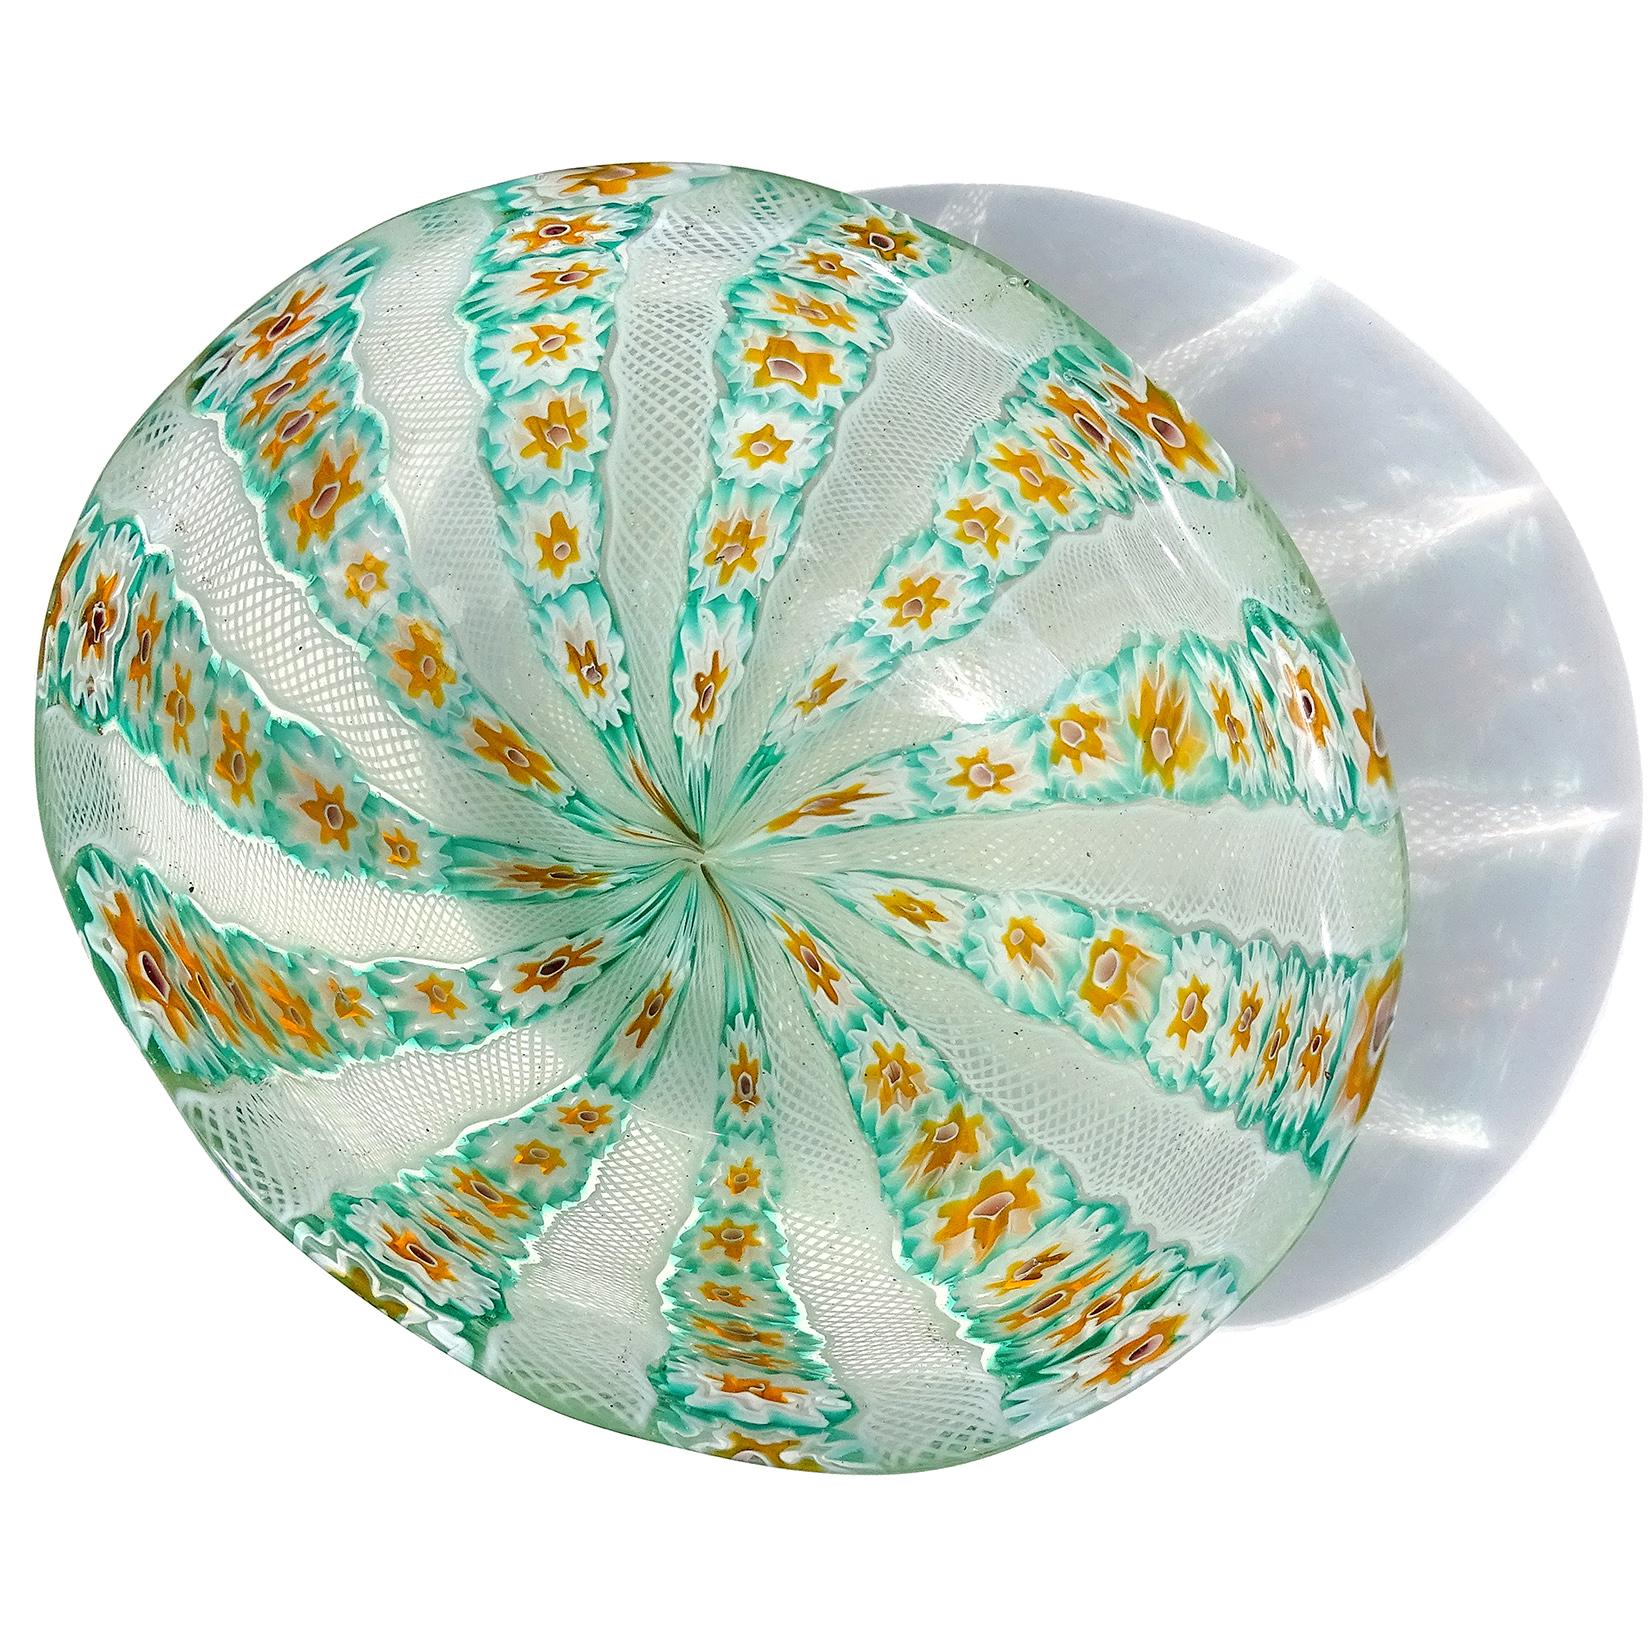 Beautiful vintage Murano handblown millefiori flower mosaic and white net ribbons Italian art glass bowl. Documented to the Fratelli Toso company. The piece has a green, white and orange color combination, with the center of the flowers in pink. The